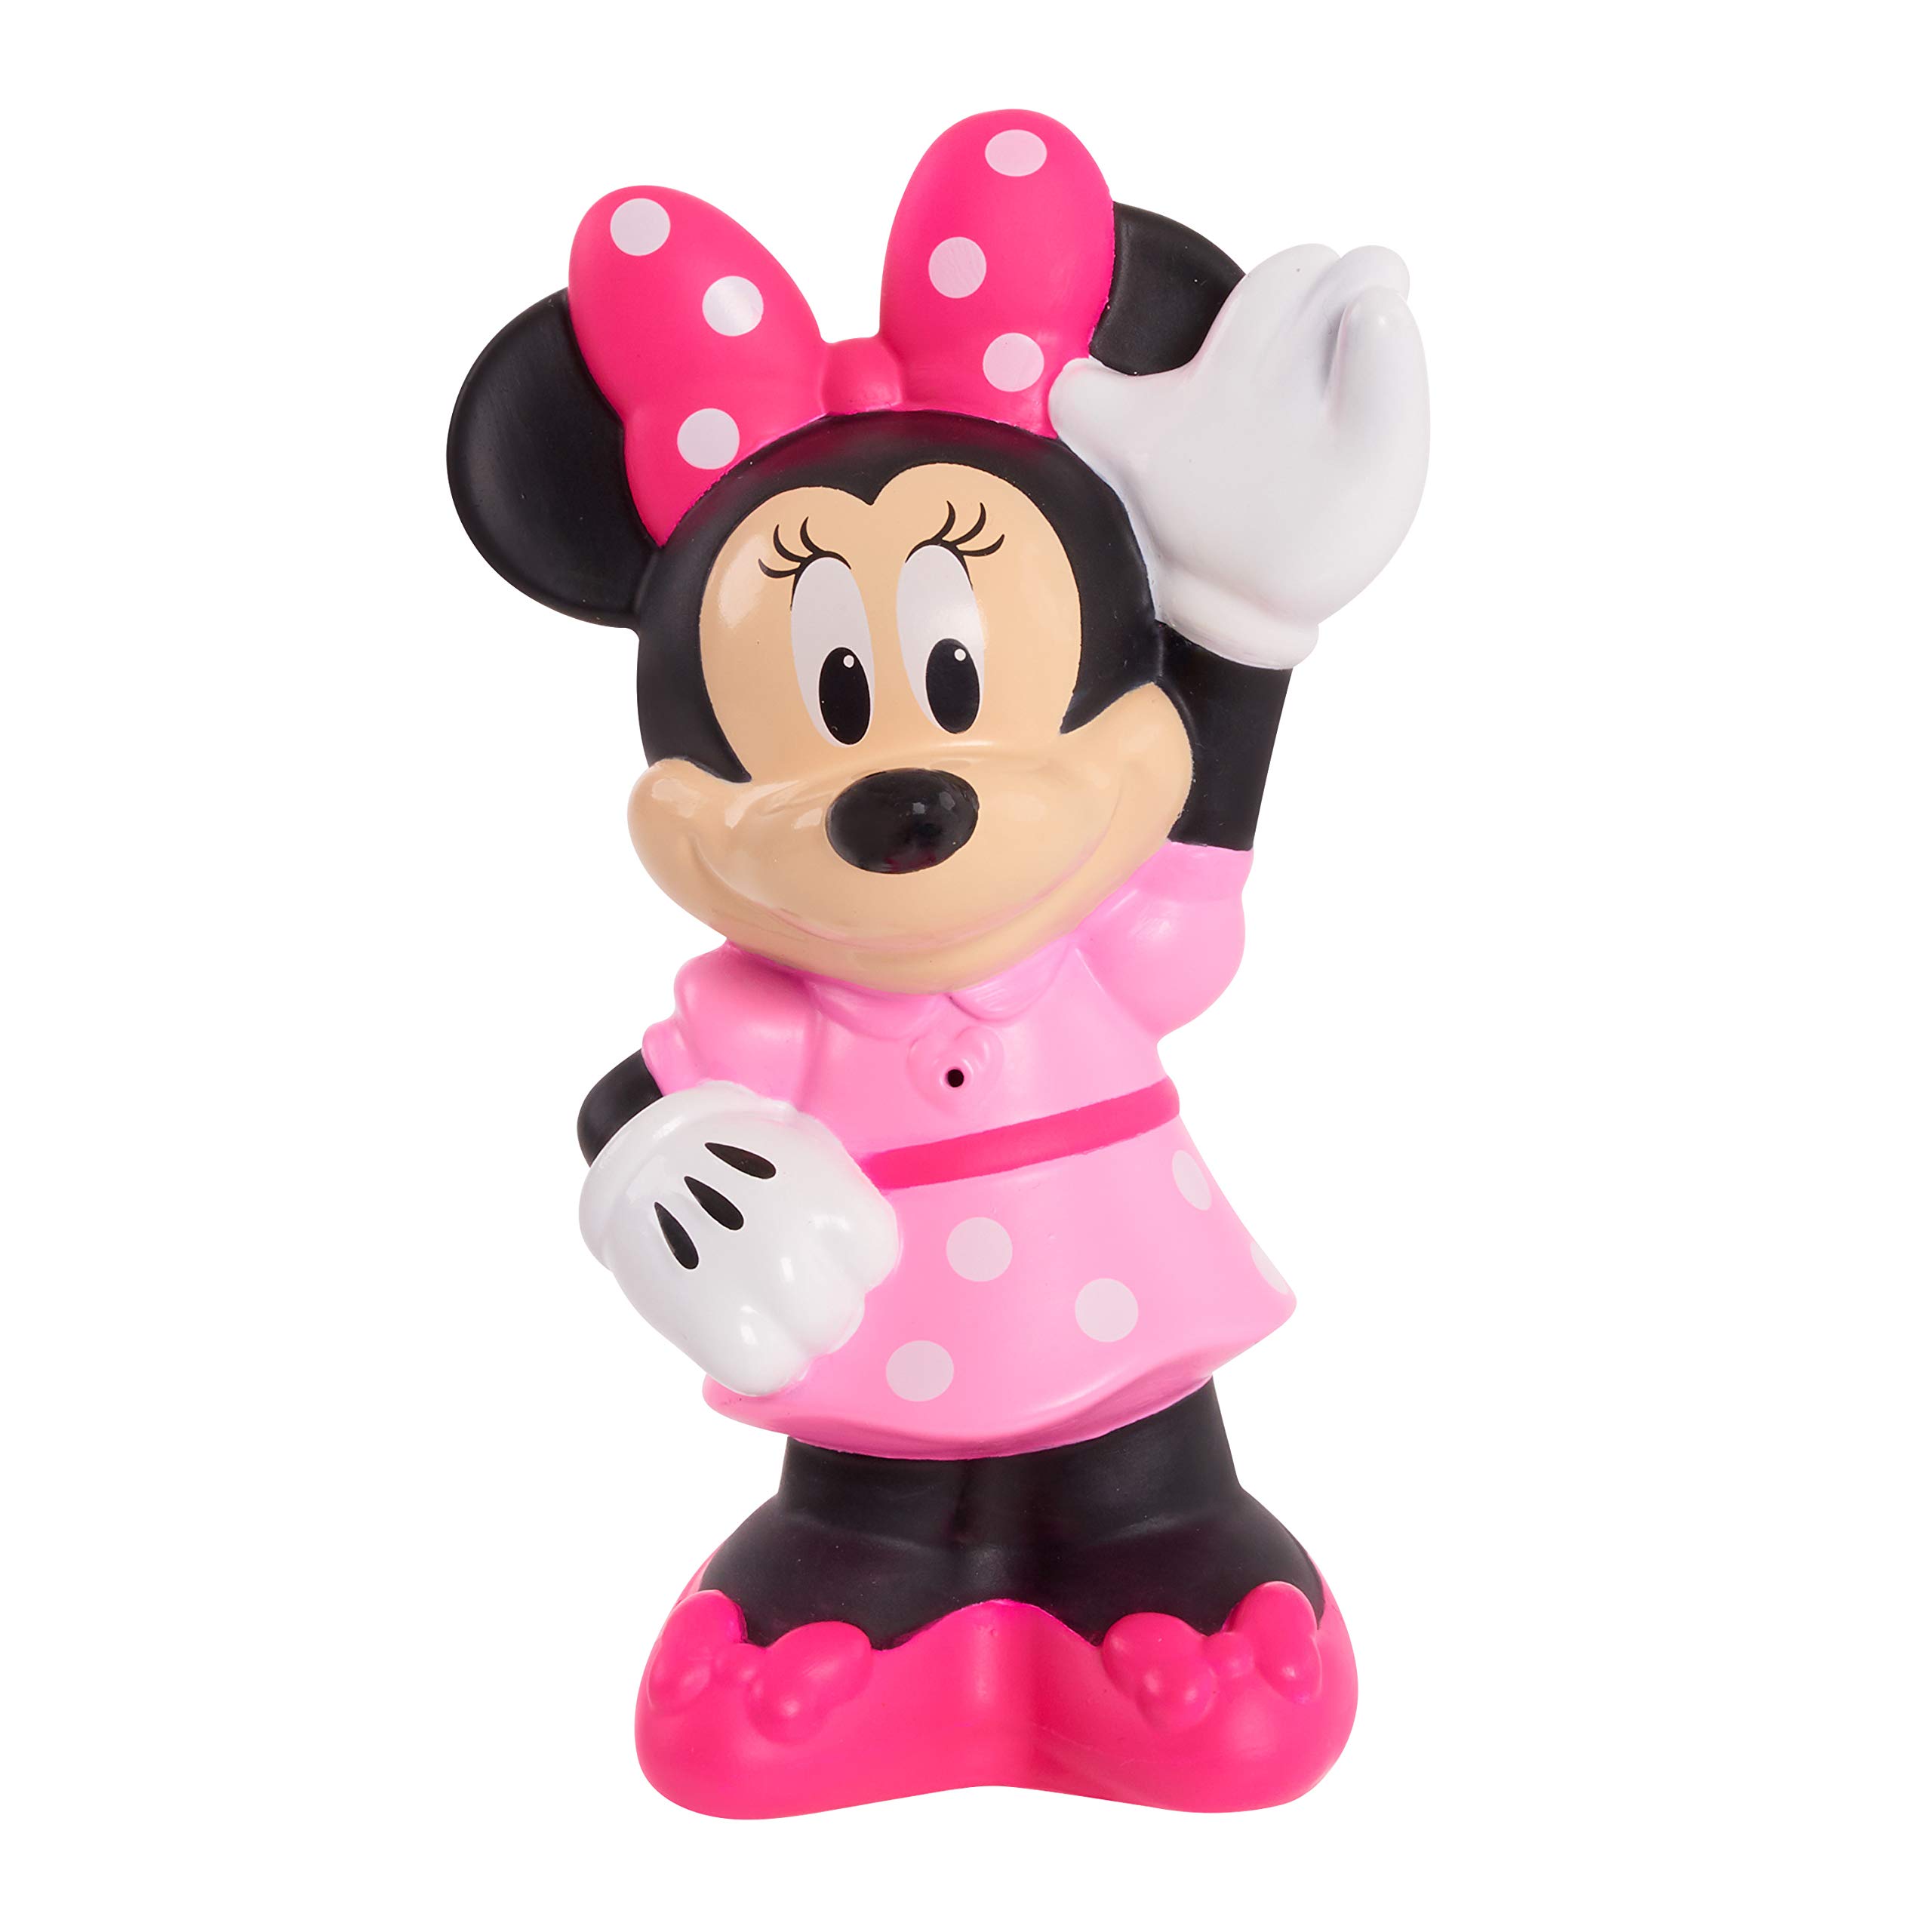 Disney Junior Minnie Mouse 3-Pack Bath Toys, Figures Include Minnie Mouse, Daisy Duck, and Figaro, Amazon Exclusive, by Just Play